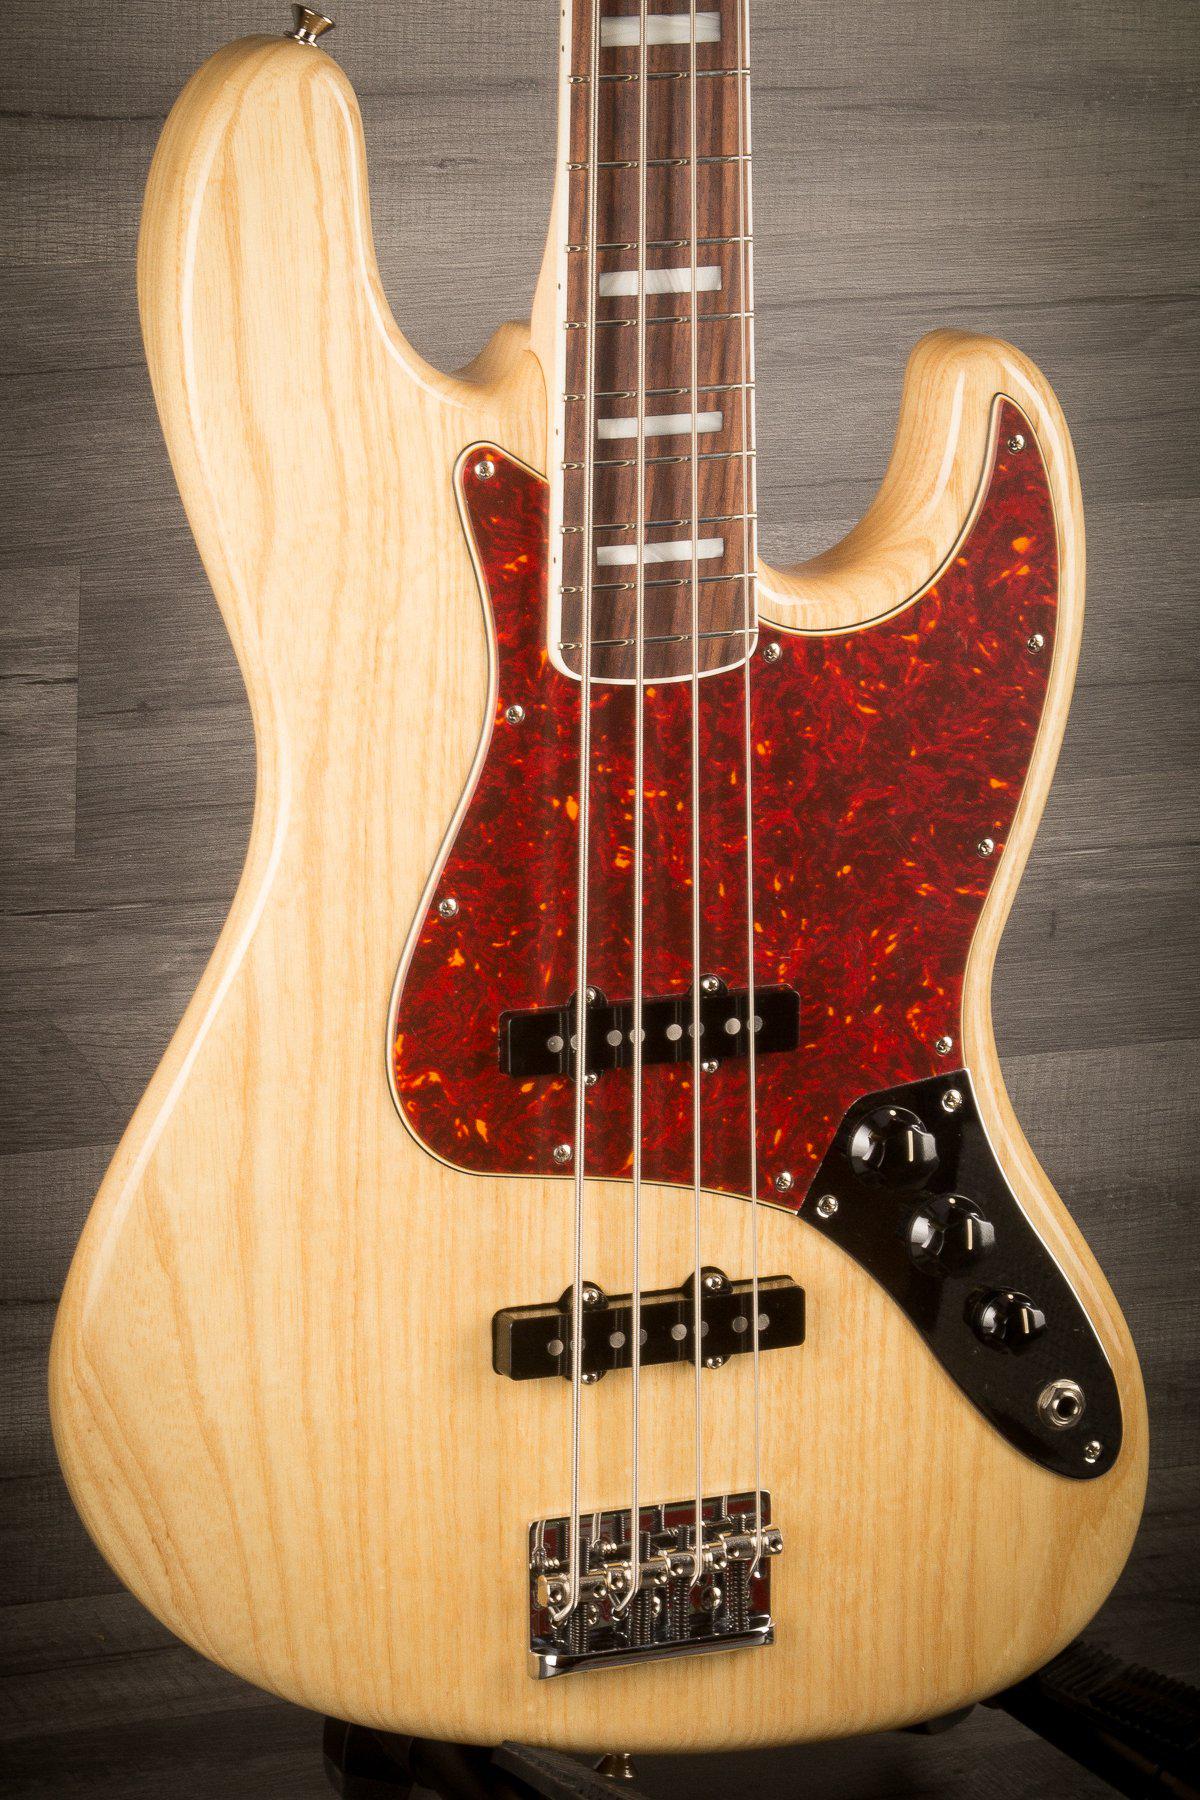 Fender Bass Guitar Fender Made in Japan 2019 Limited Collection Jazz Bass - Natural